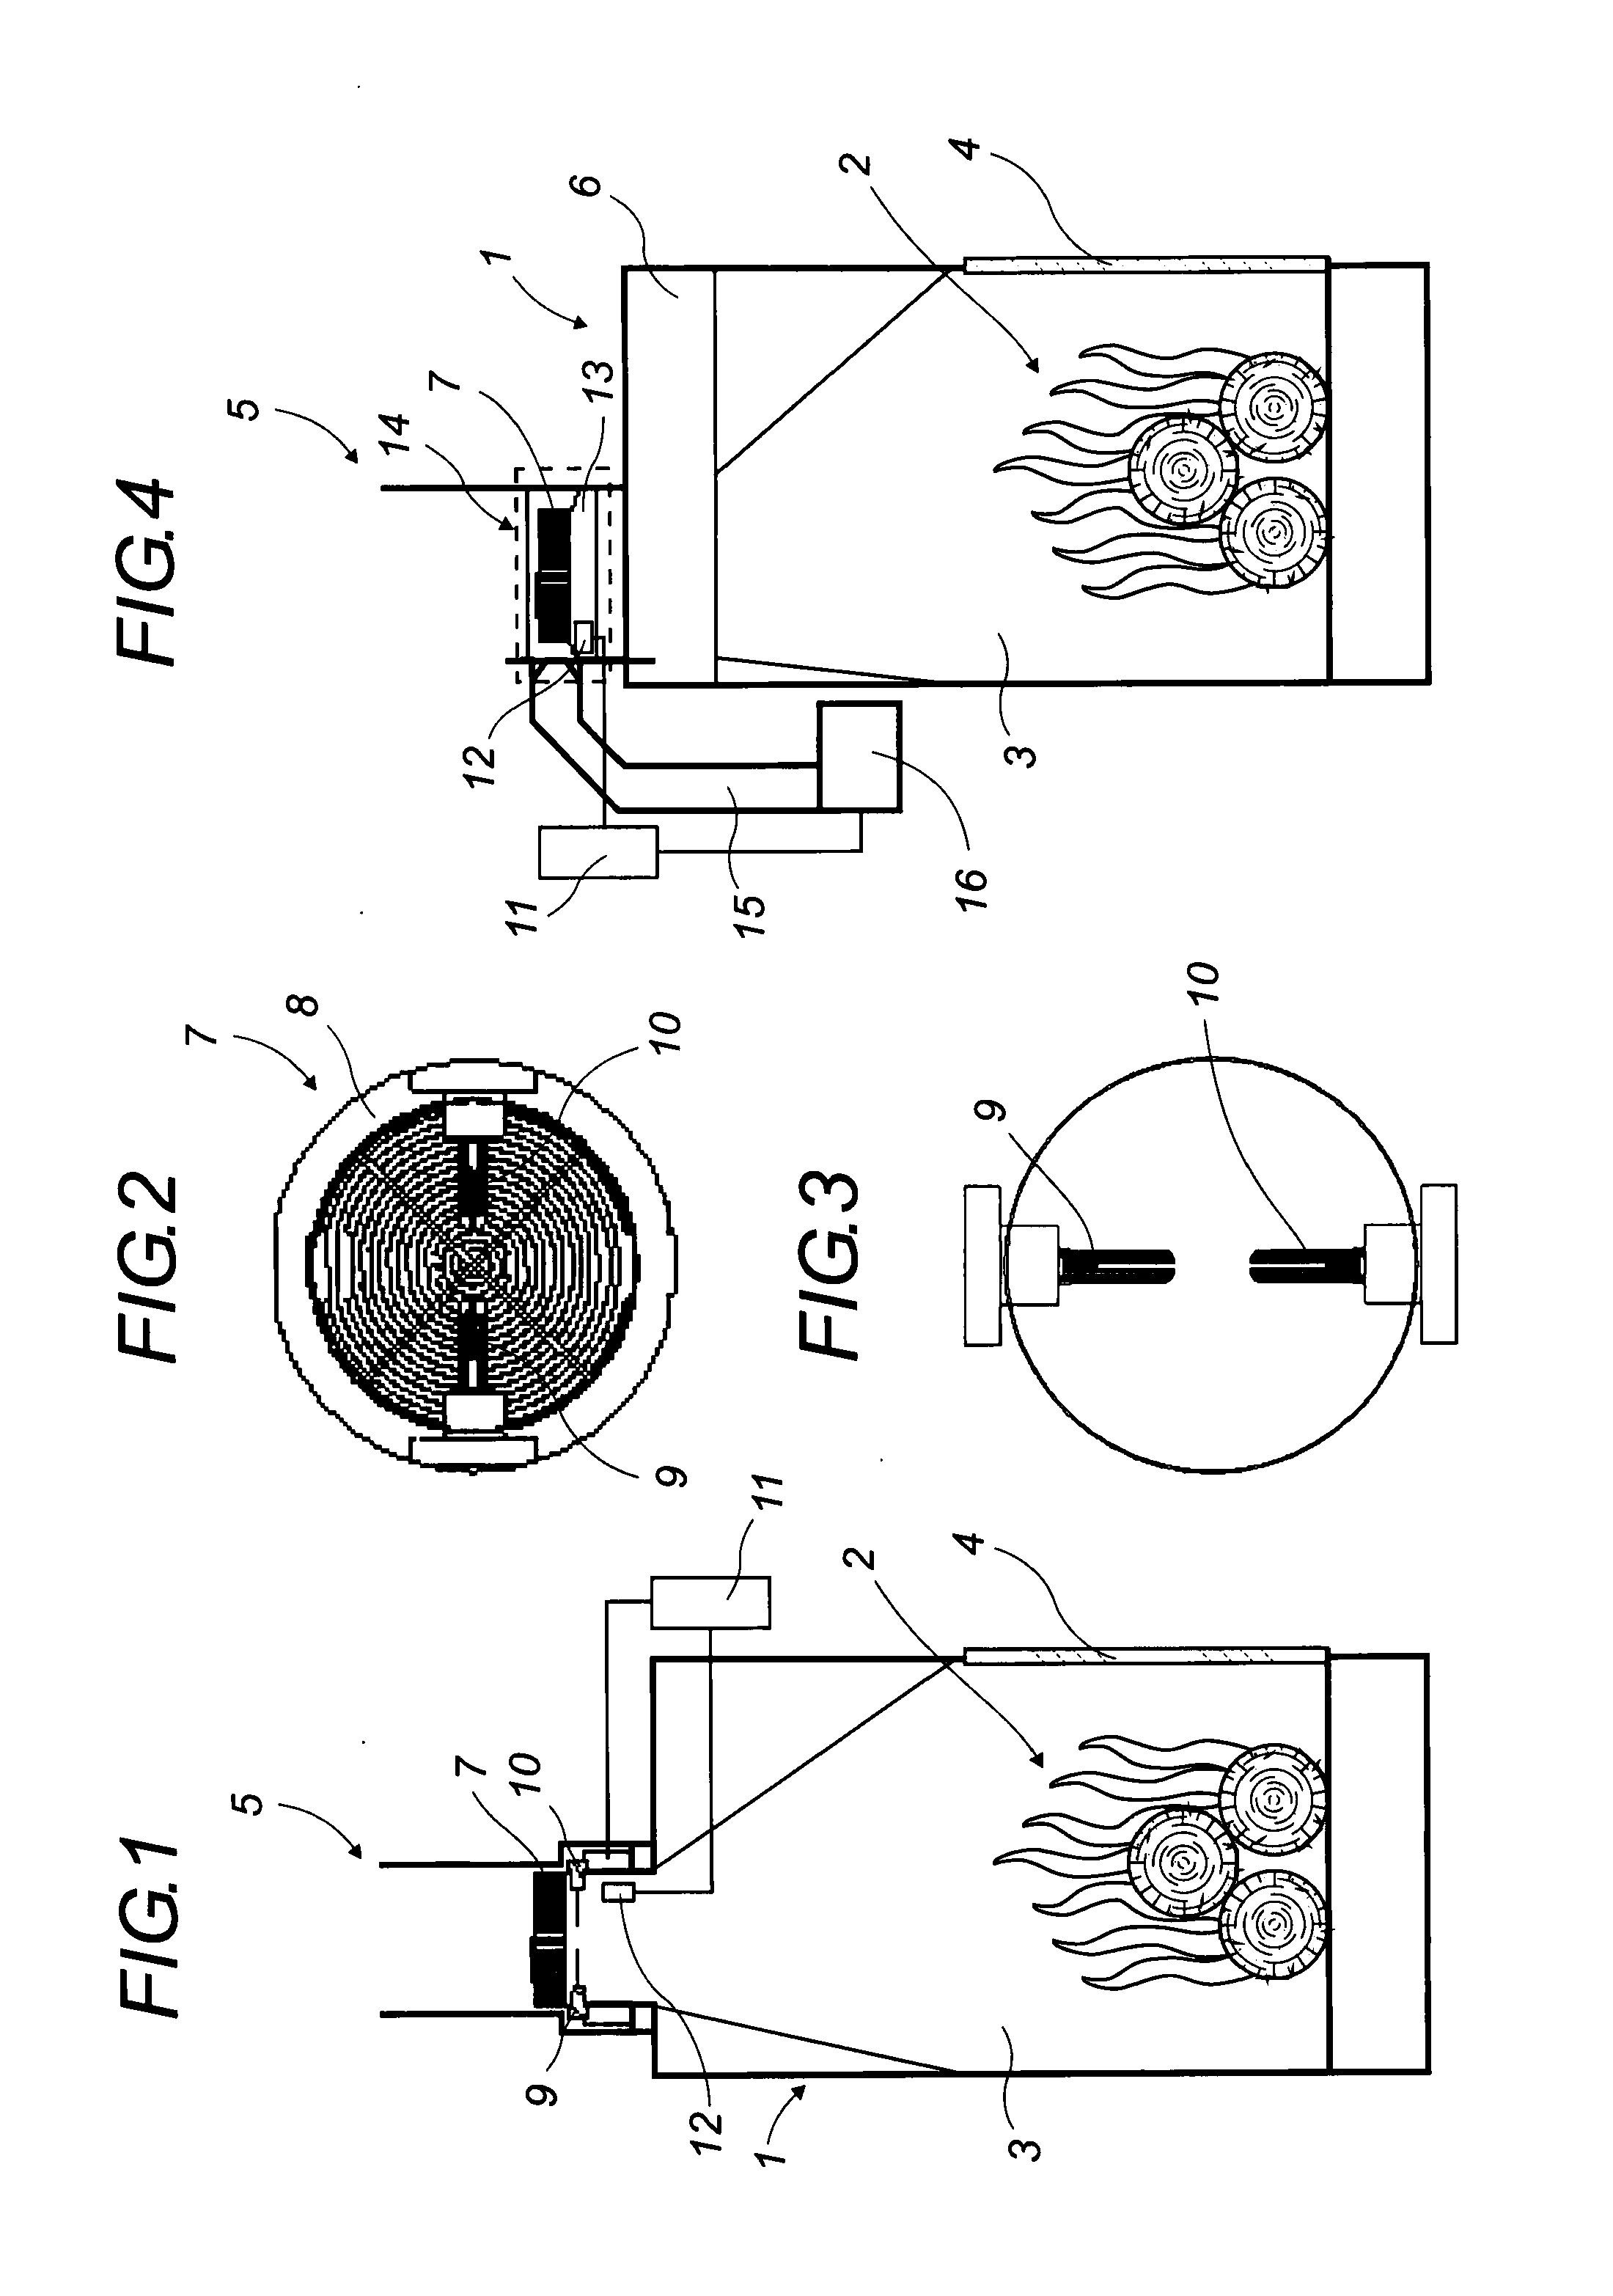 Purification assembly having catalysts for gases and combustion fumes from solid fuel heating apparatus